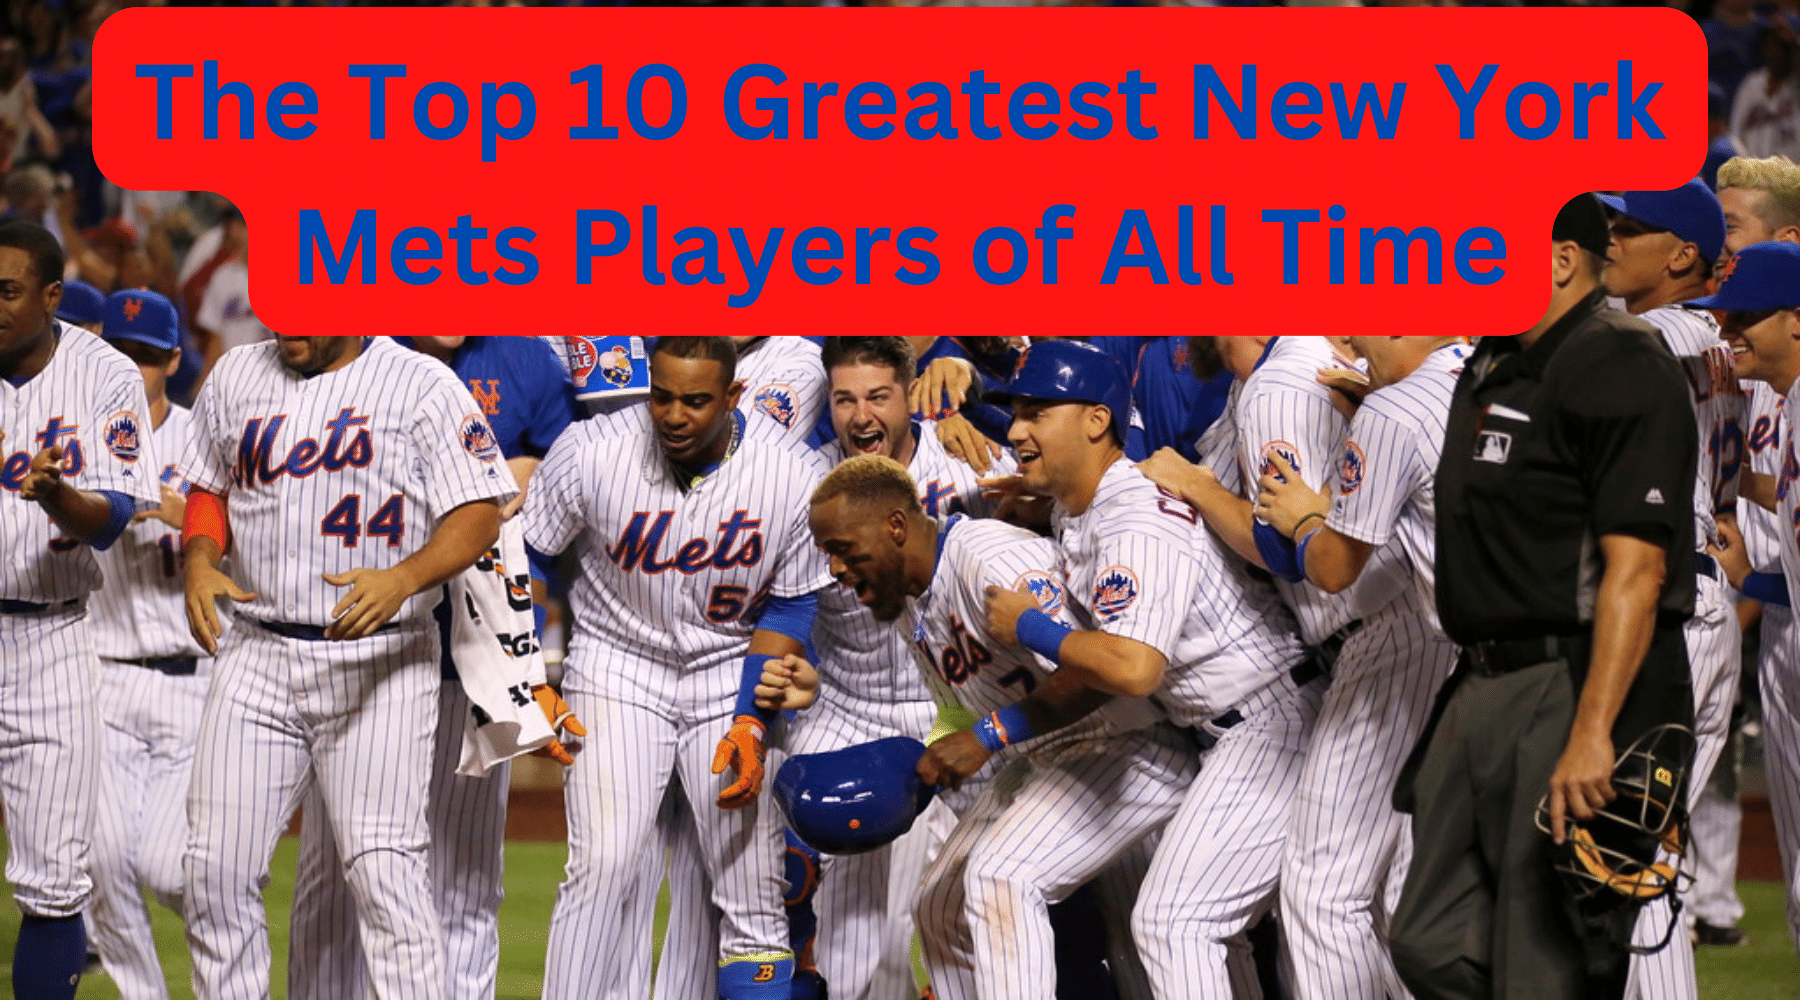 The Top 10 Greatest New York Mets Players of All Time